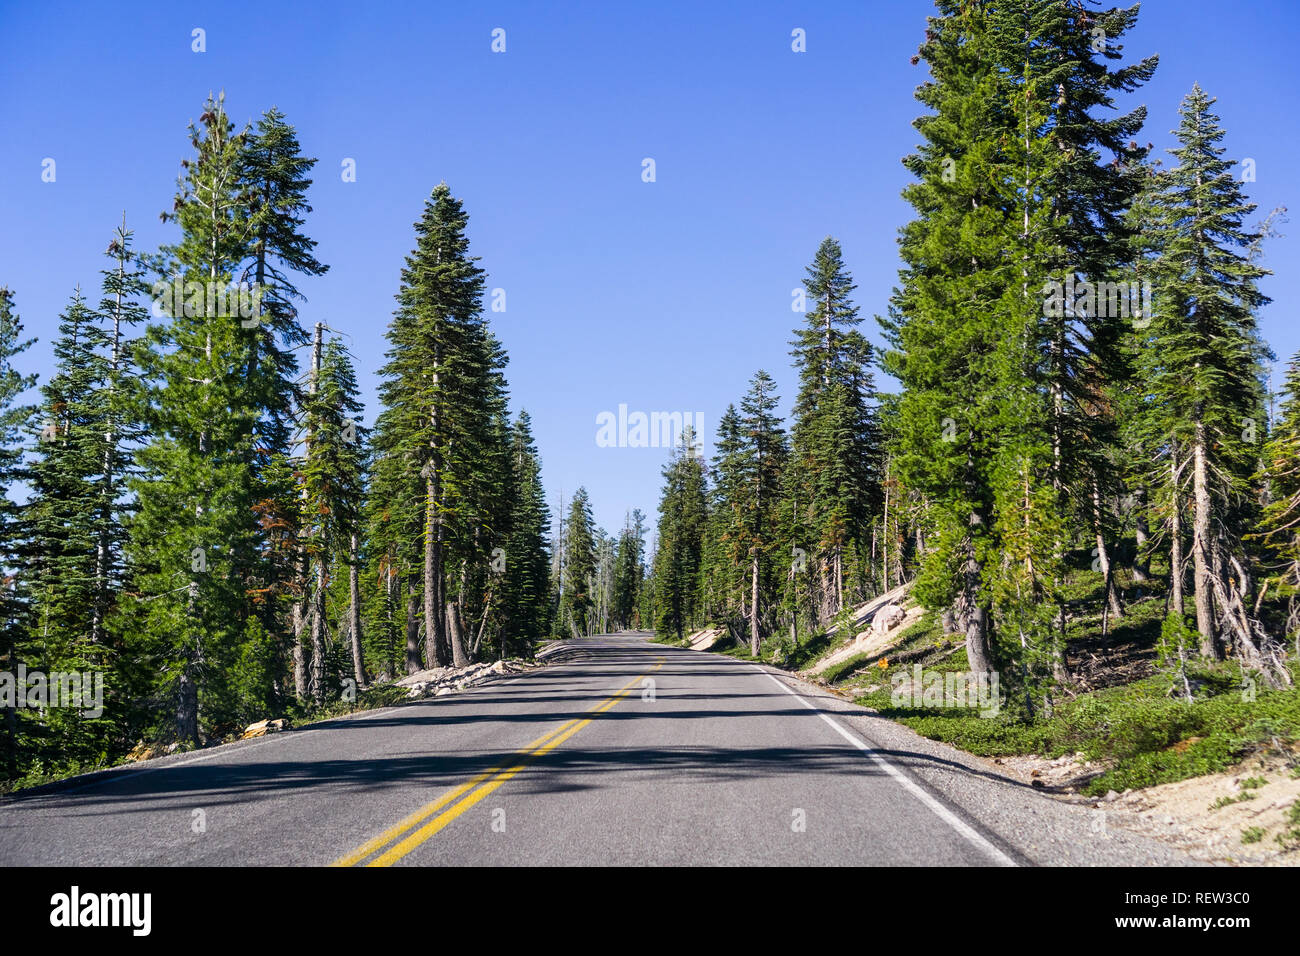 Travelling on a winding road through the evergreen forests of Lassen Volcanic National Park, Shasta County, California Stock Photo